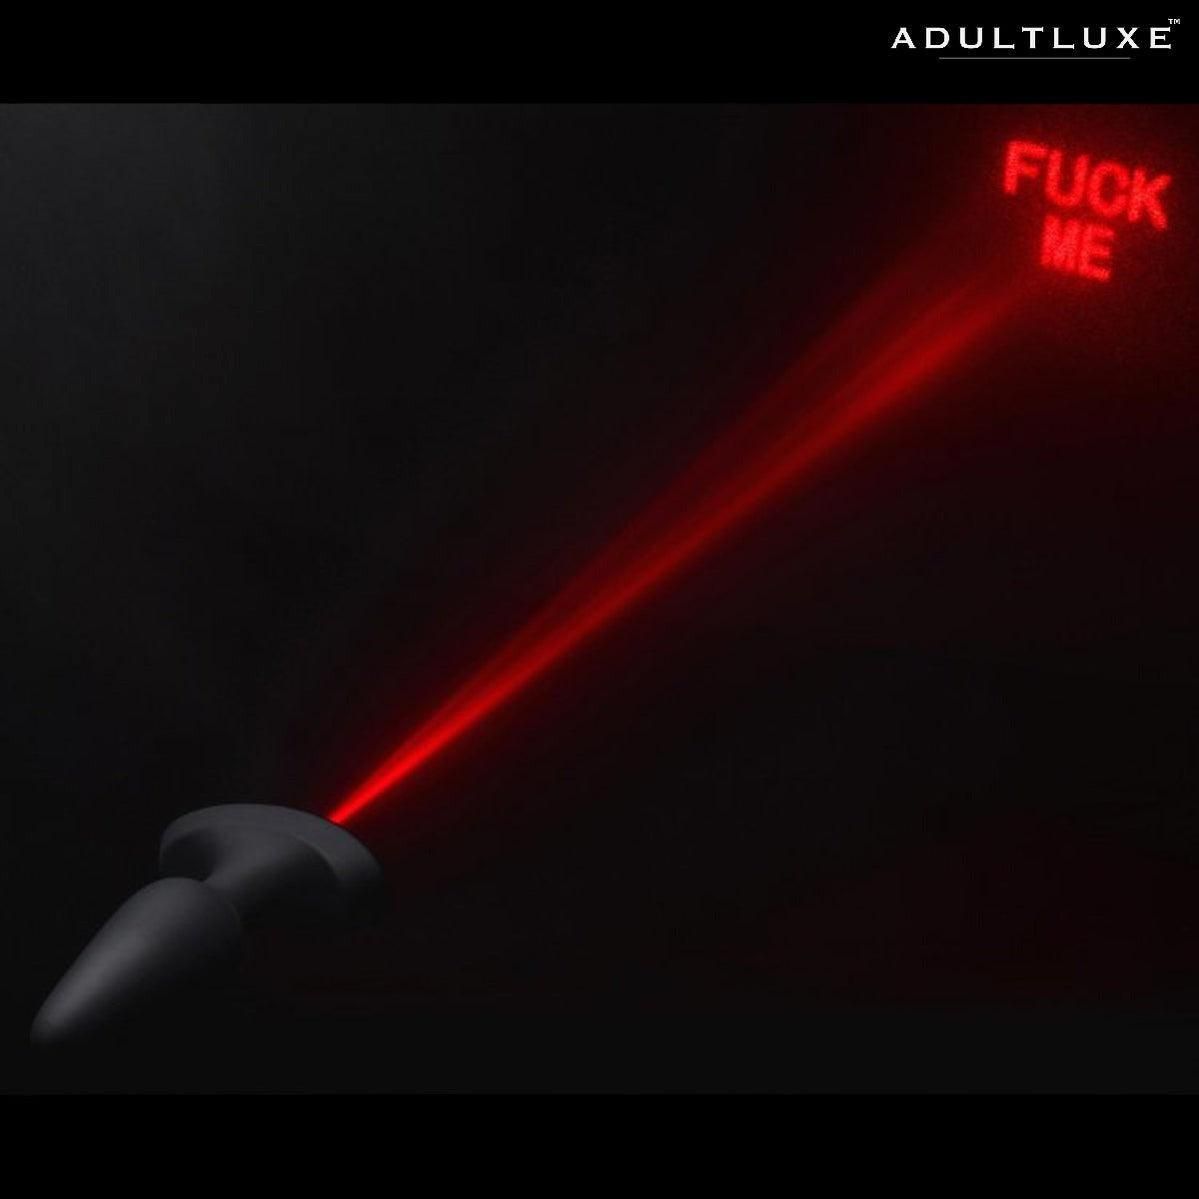 Booty Sparks Laser Fuck Me Anal Plug - AdultLuxe